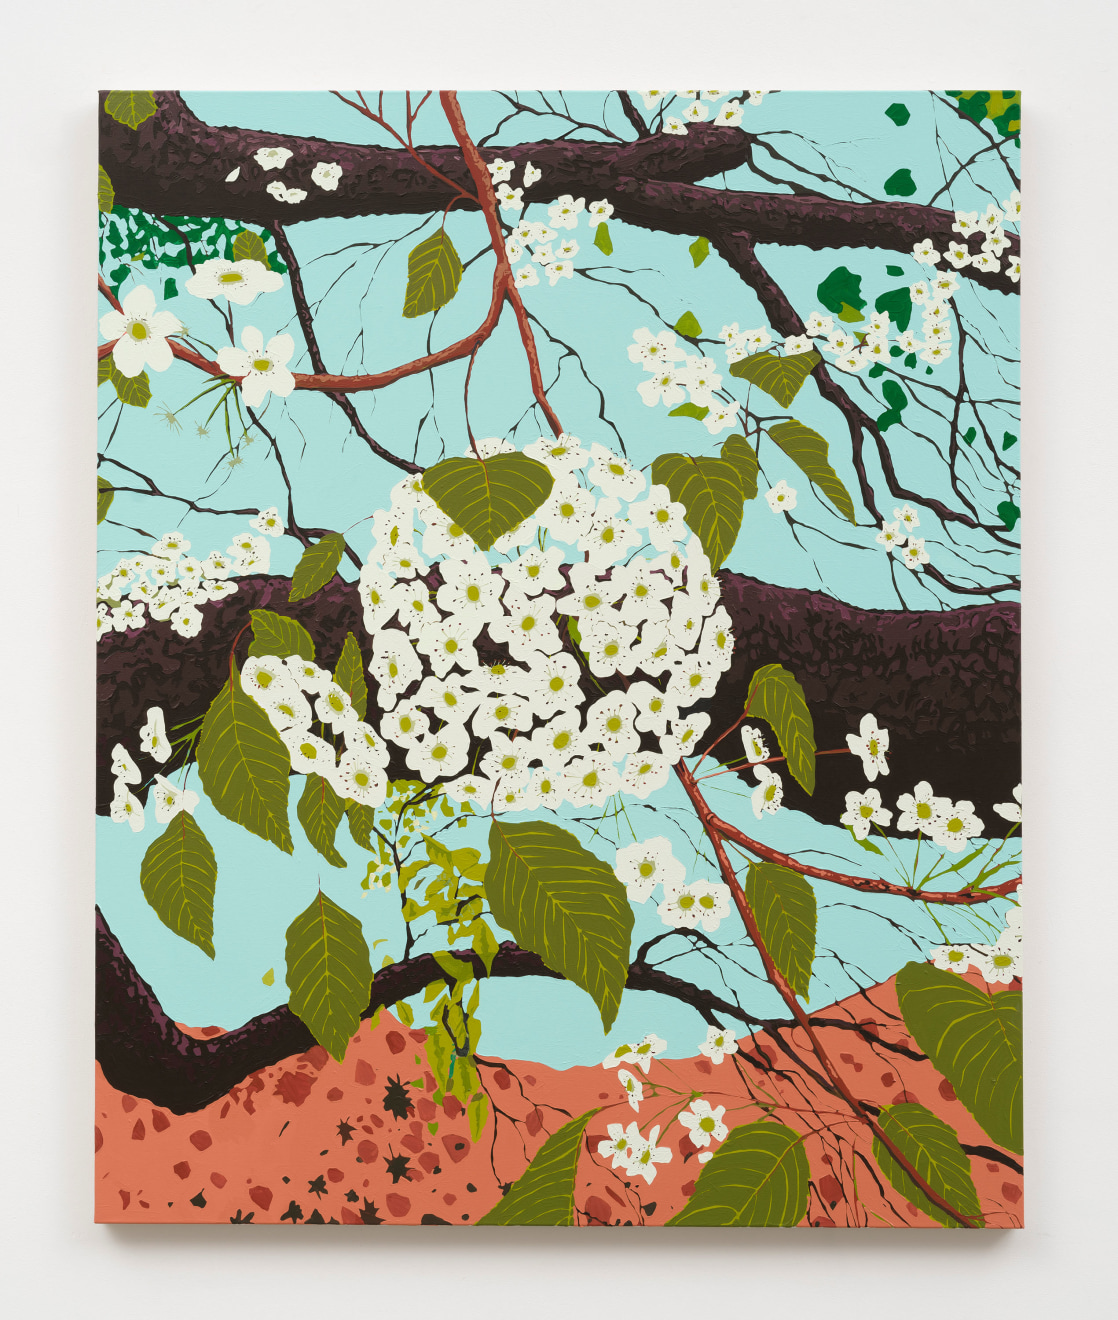 Hilary Pecis, Frog Town Pear Blossoms, 2023